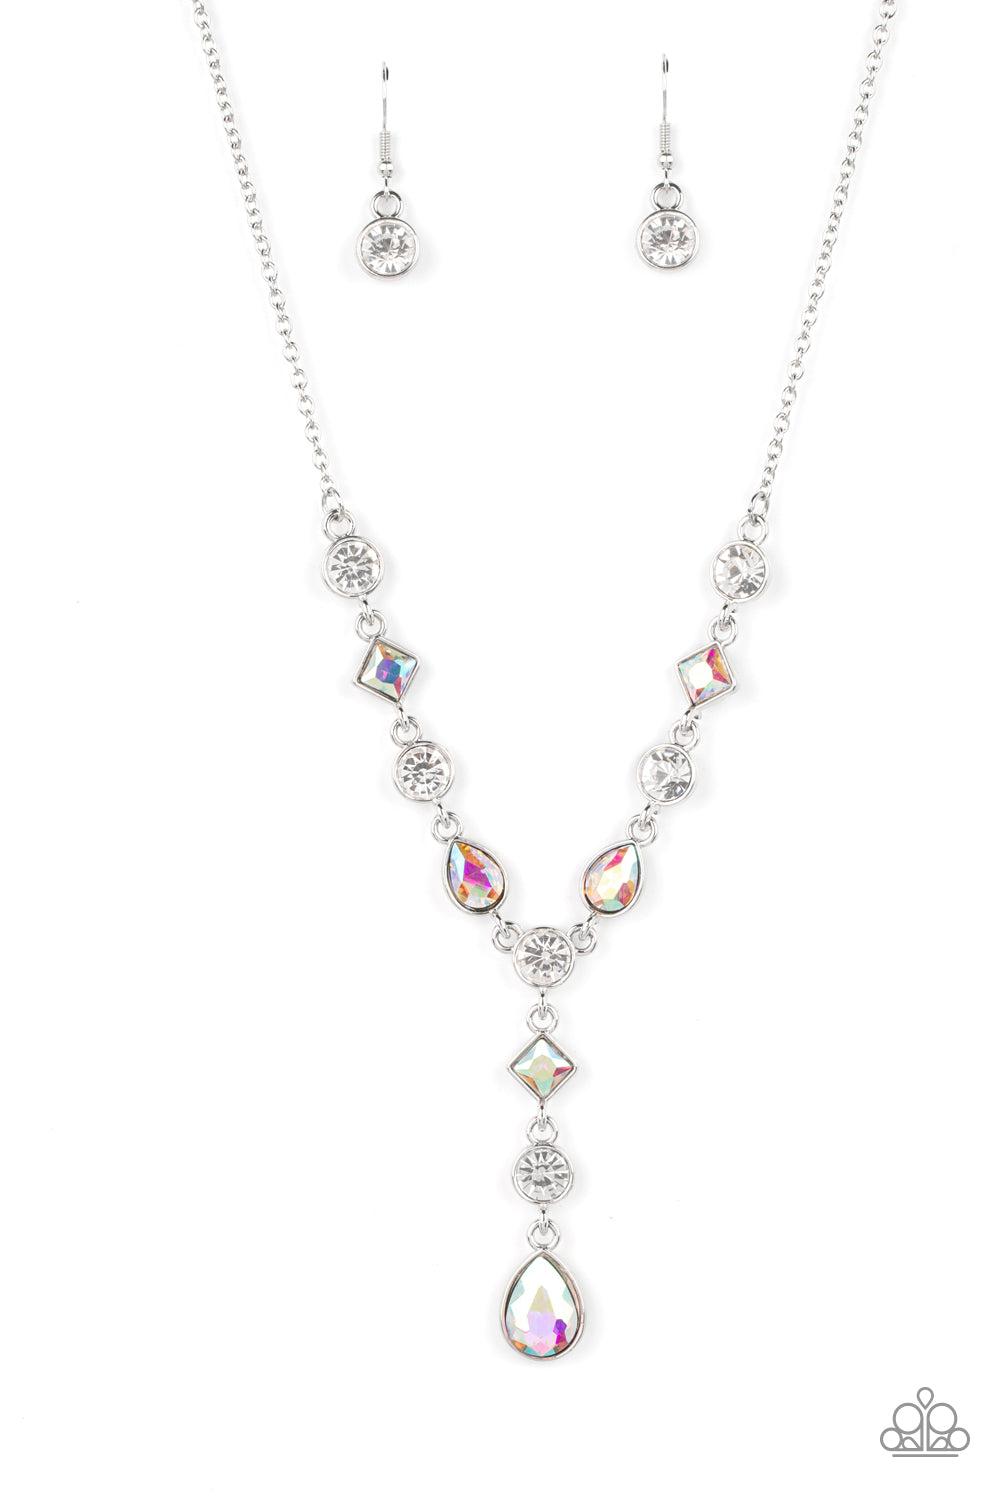 Forget the Crown Multi Iridescent Gem Necklace - Paparazzi Accessories- lightbox - CarasShop.com - $5 Jewelry by Cara Jewels